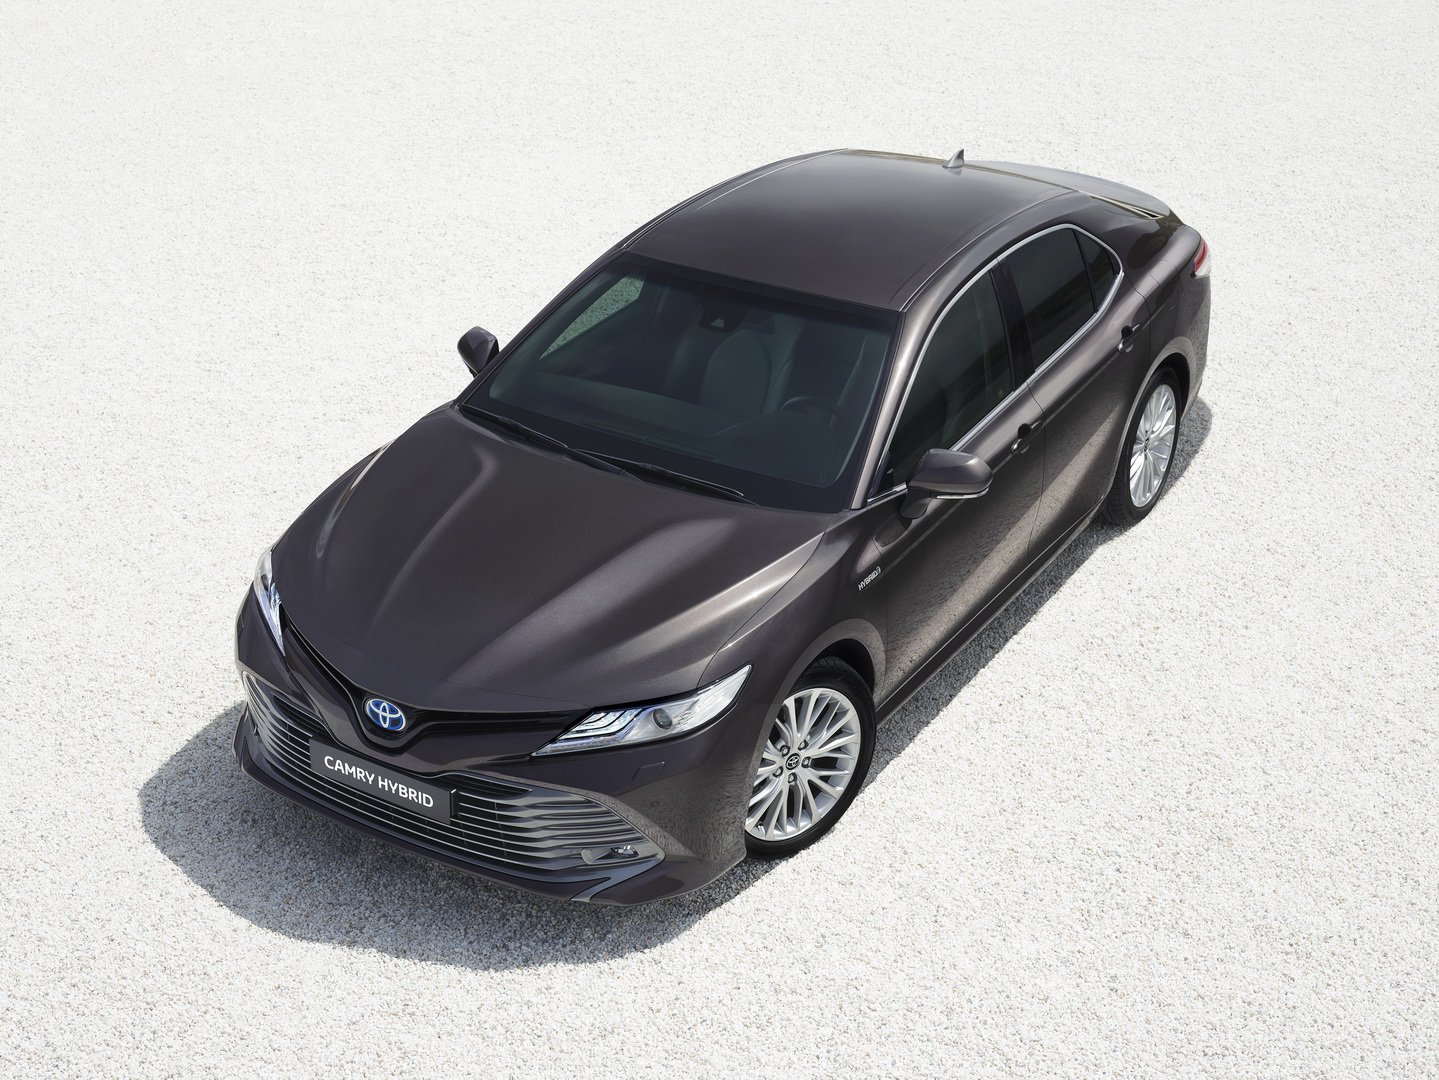 2020 Toyota Camry Hybrid: Review, Specs and Price in UAE